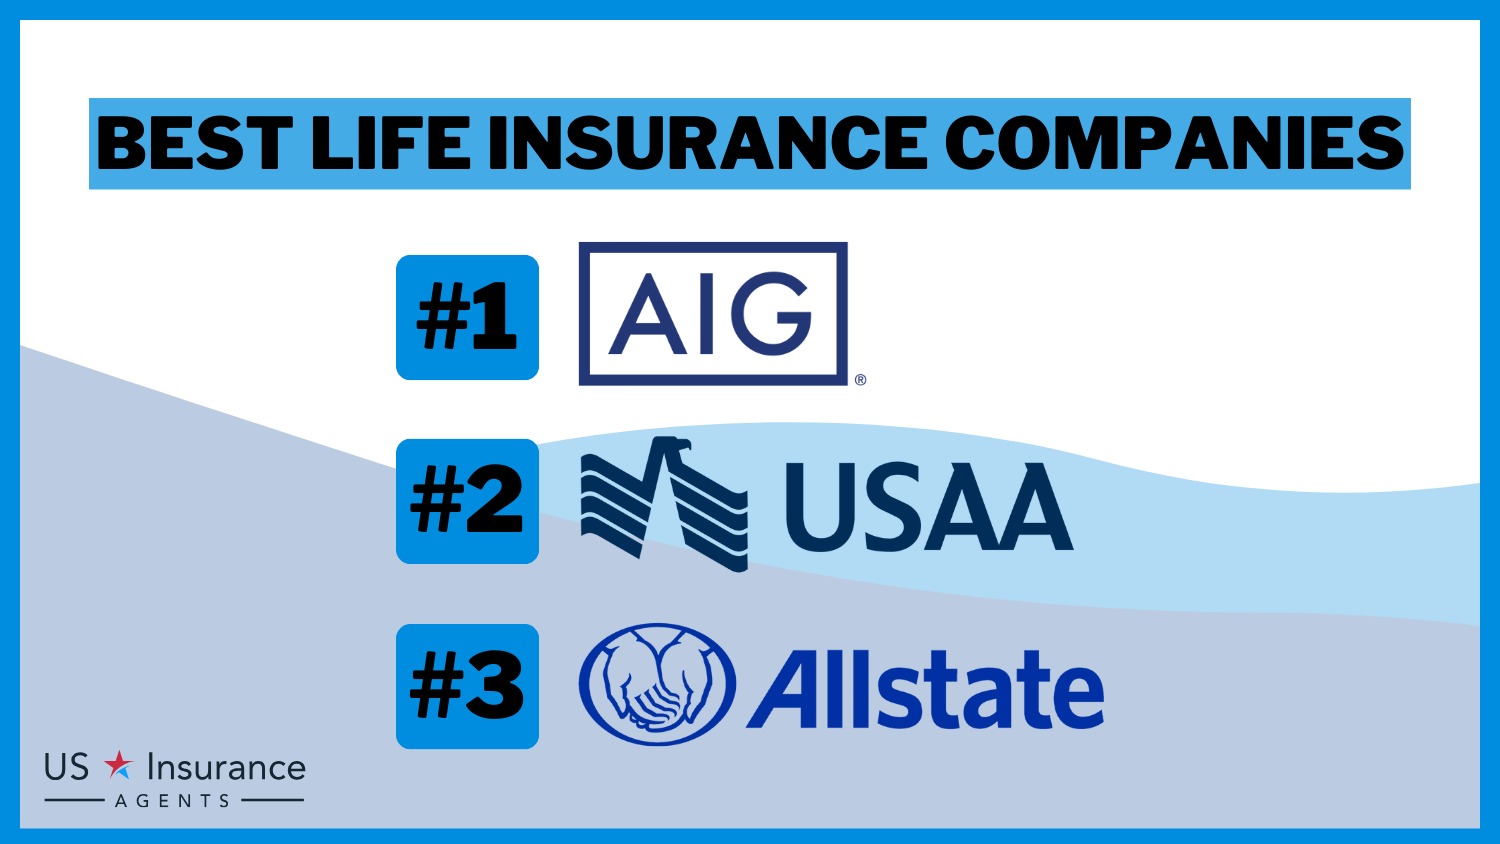 Best Life Insurance Companies: AIG, USAA, and Allstate